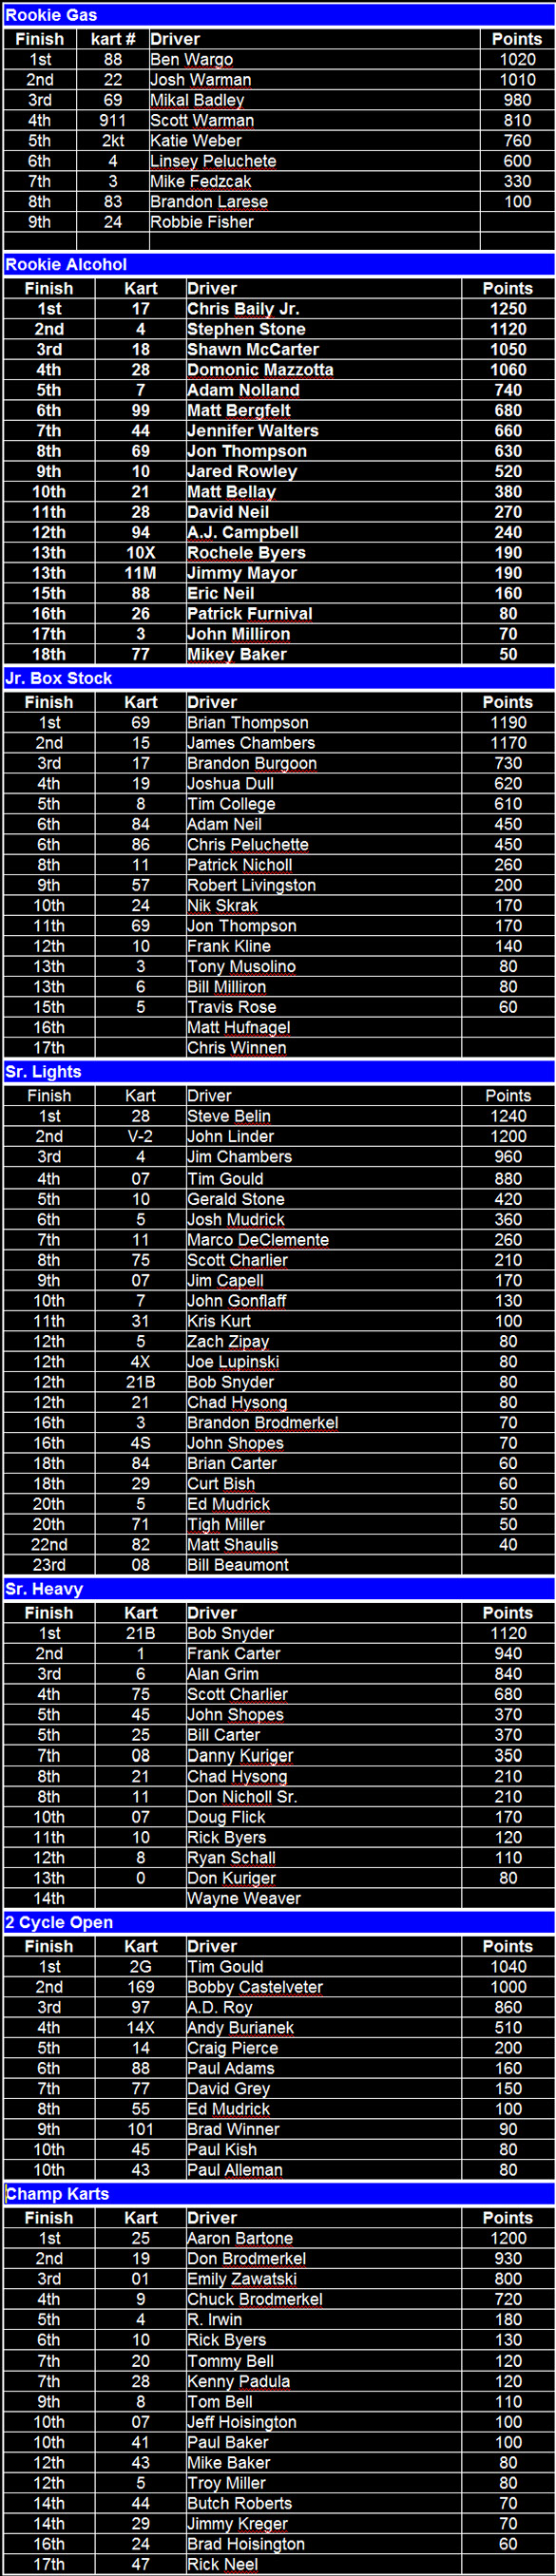 Naugle Speedway 1999 Final Point Standings